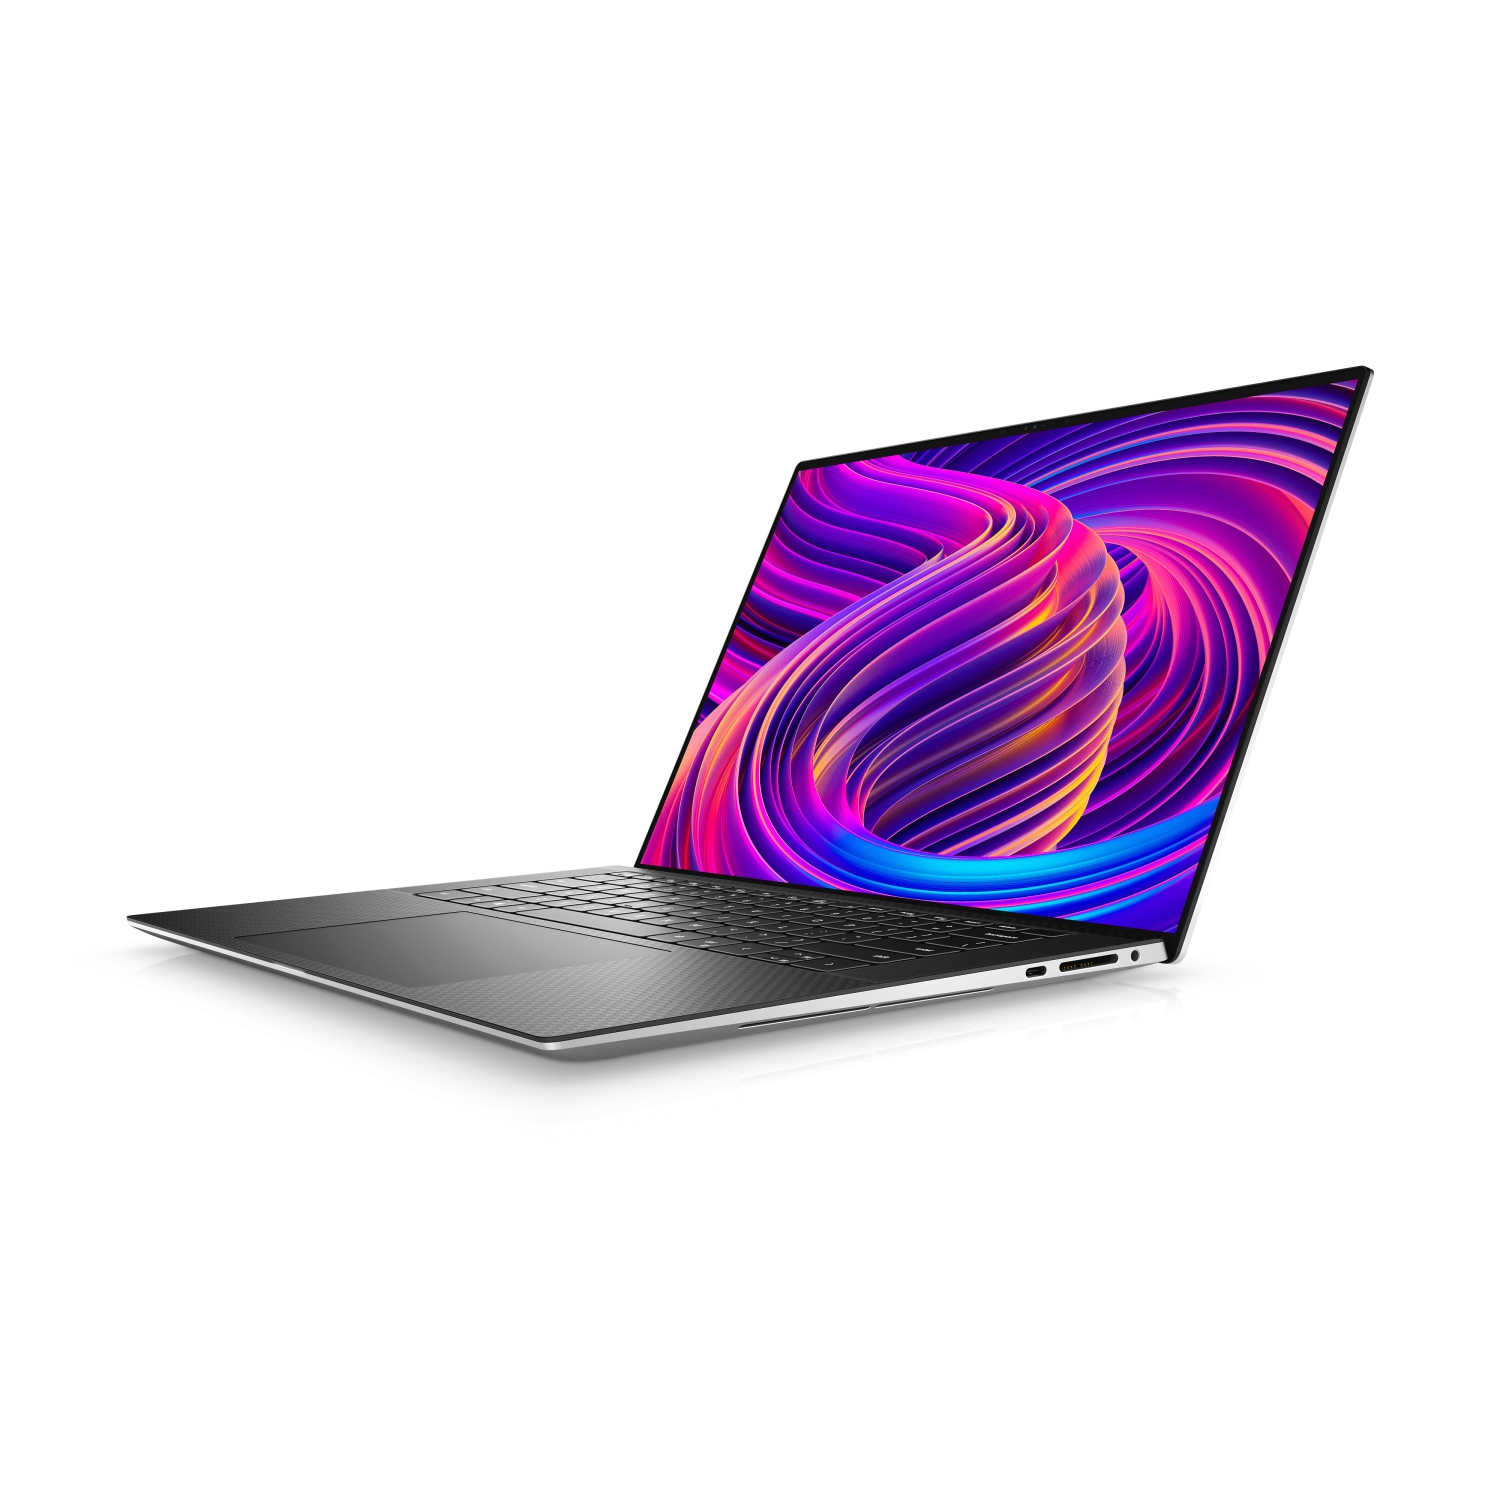 Refurbished (Excellent) - Dell XPS 15 9510 Laptop (2021), 15.6" 4K Touch, Core i7 - 1TB SSD - 16GB RAM - RTX 3050, 8 Cores @ 4.6 GHz - 11th Gen CPU Certified Refurbished